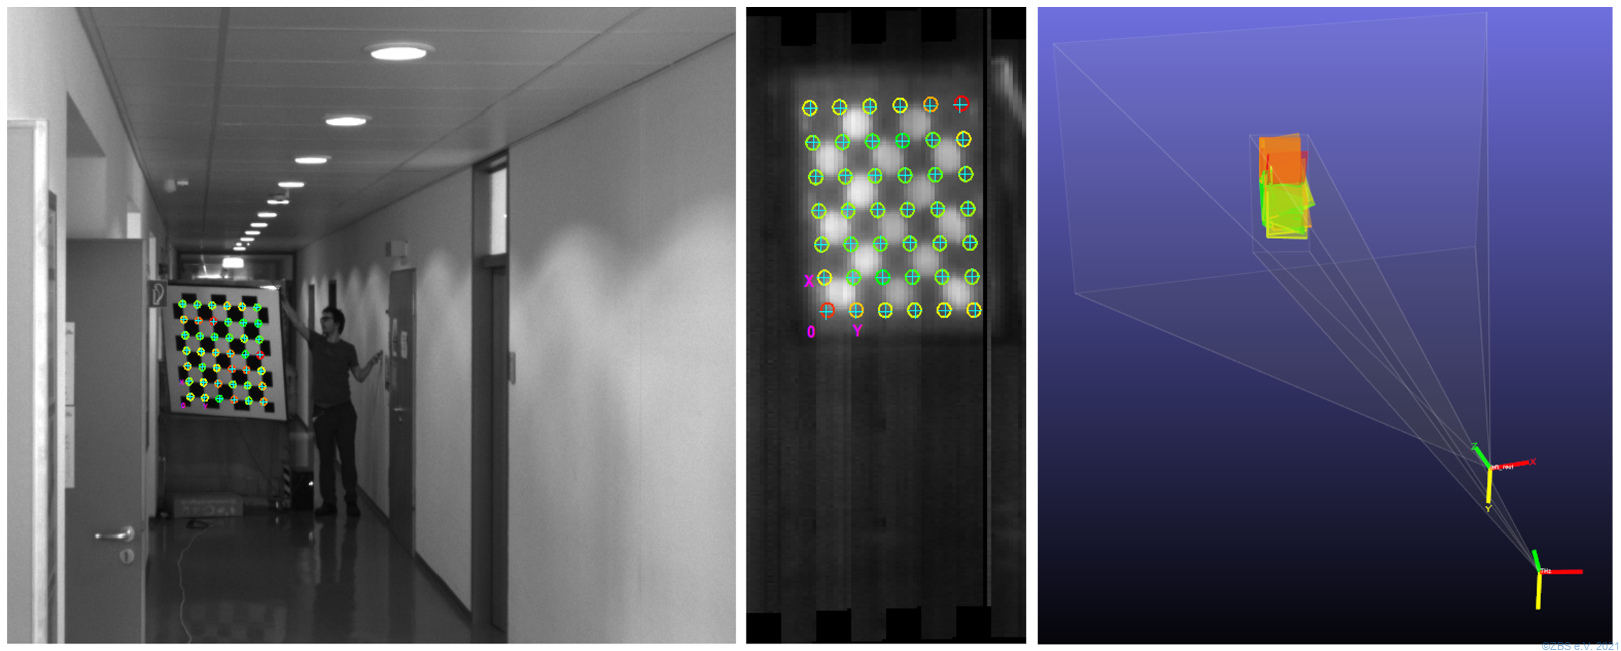 Extrinsic calibration of an imaging THz scanner (body scanner) and a monochrome camera for a depth-based sensor fusion. On the left is the image of the target taken with a standard camera and in the middle the image of the same target recorded with the THz camera. The 3D view on the right uses the camera coordinate systems to show the relative orientation and position of these two sensors to another as well as the different target poses.